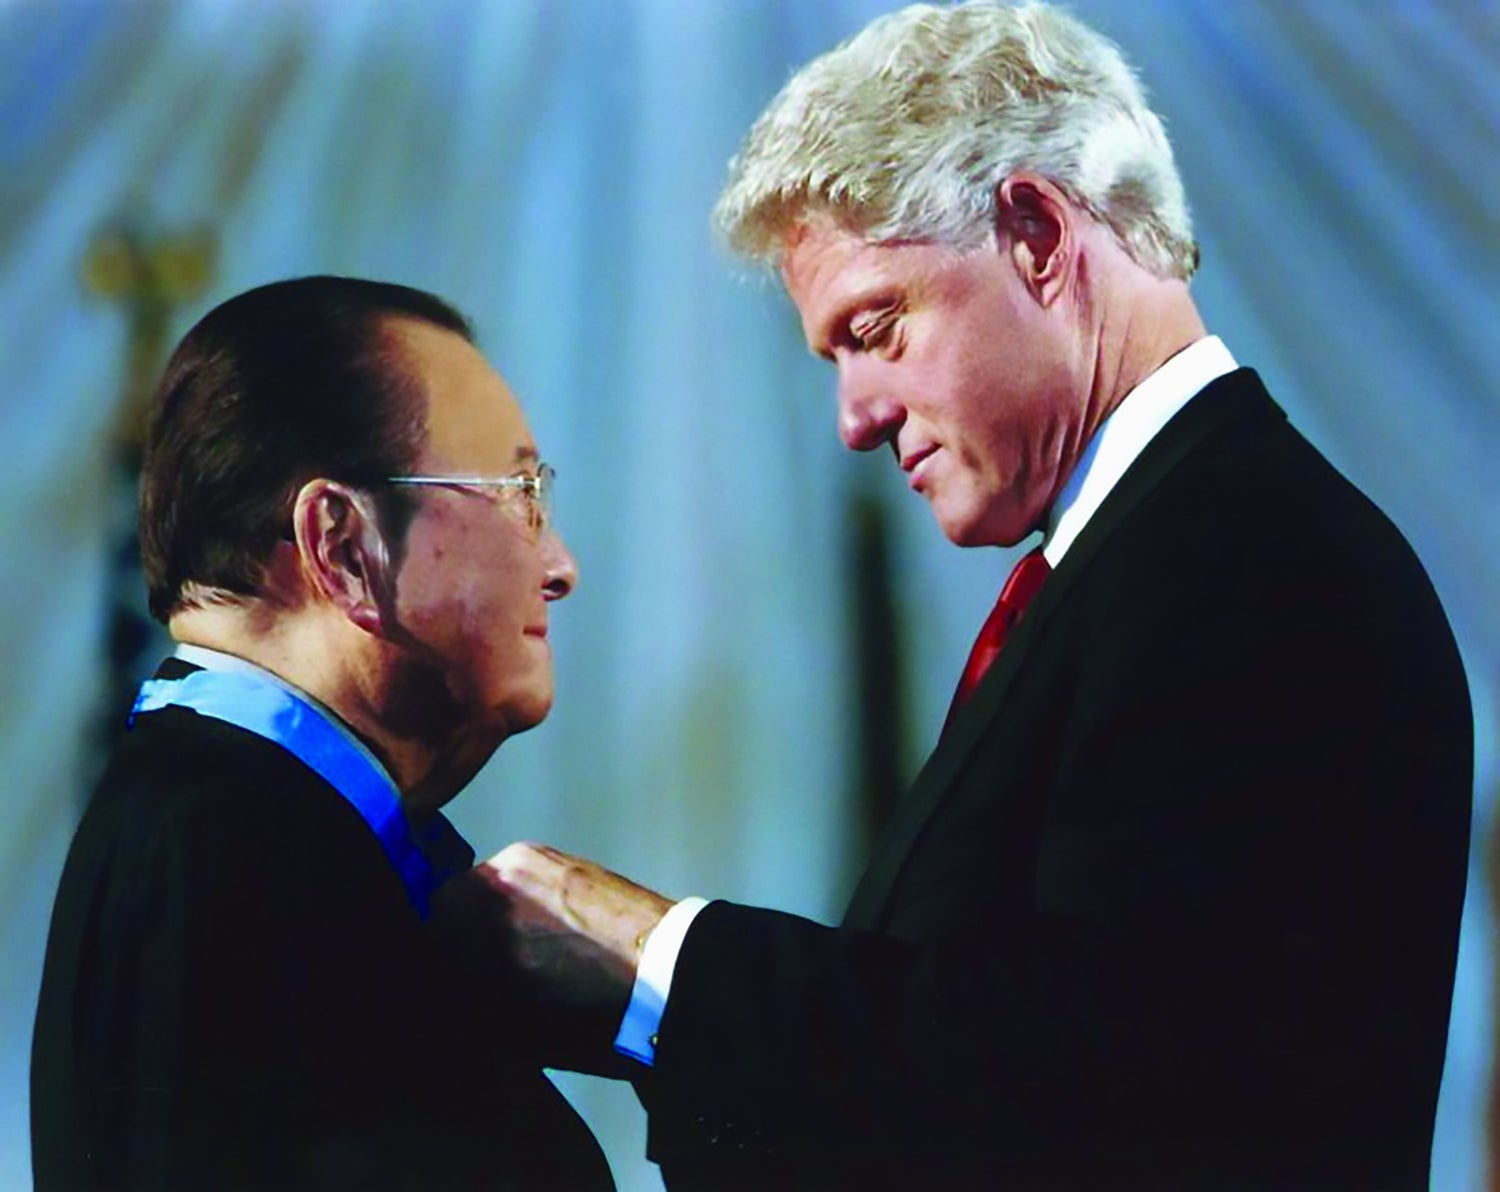 On June 21, 2000, Inouye, left, by then a U.S. senator, received the Medal of Honor from President Bill Clinton. (Credit: Wikipedia)